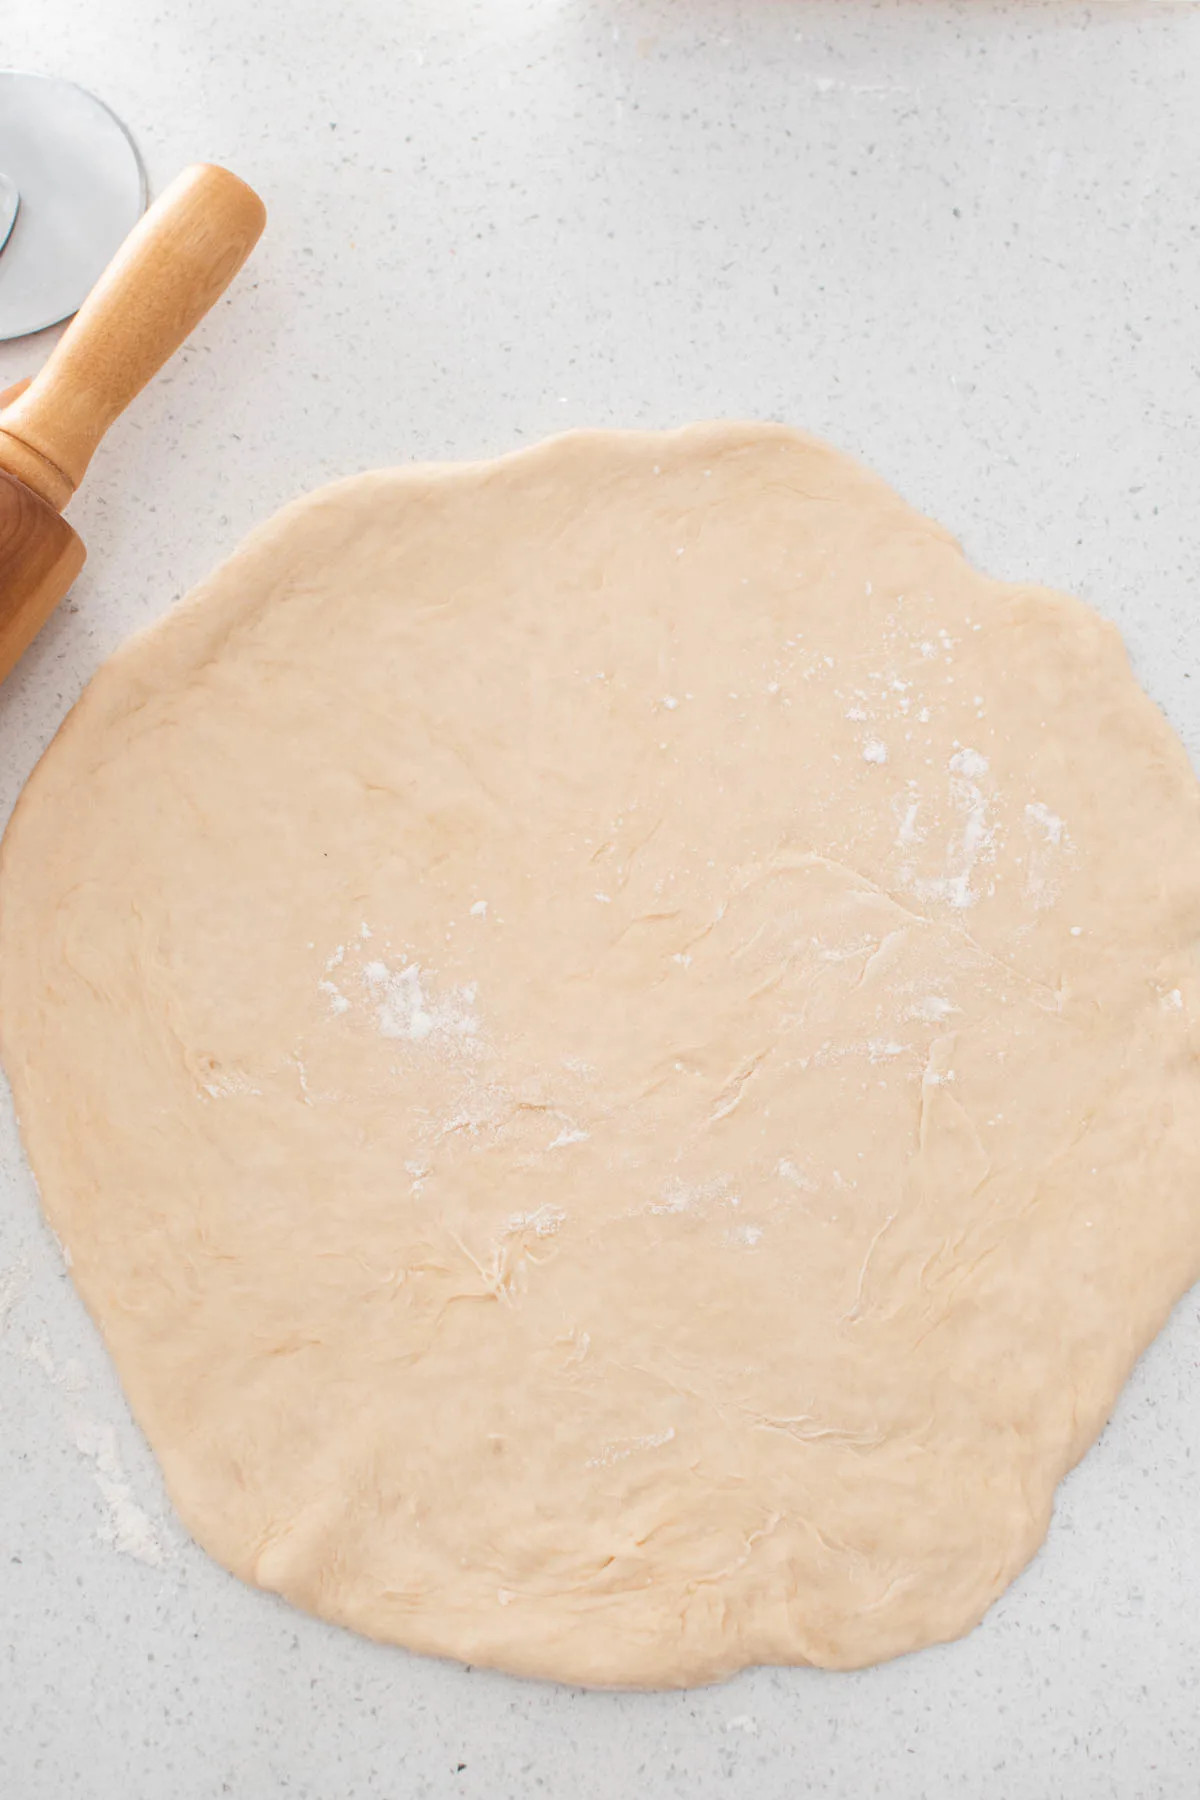 Large circle of crescent roll dough on quartz counter top.